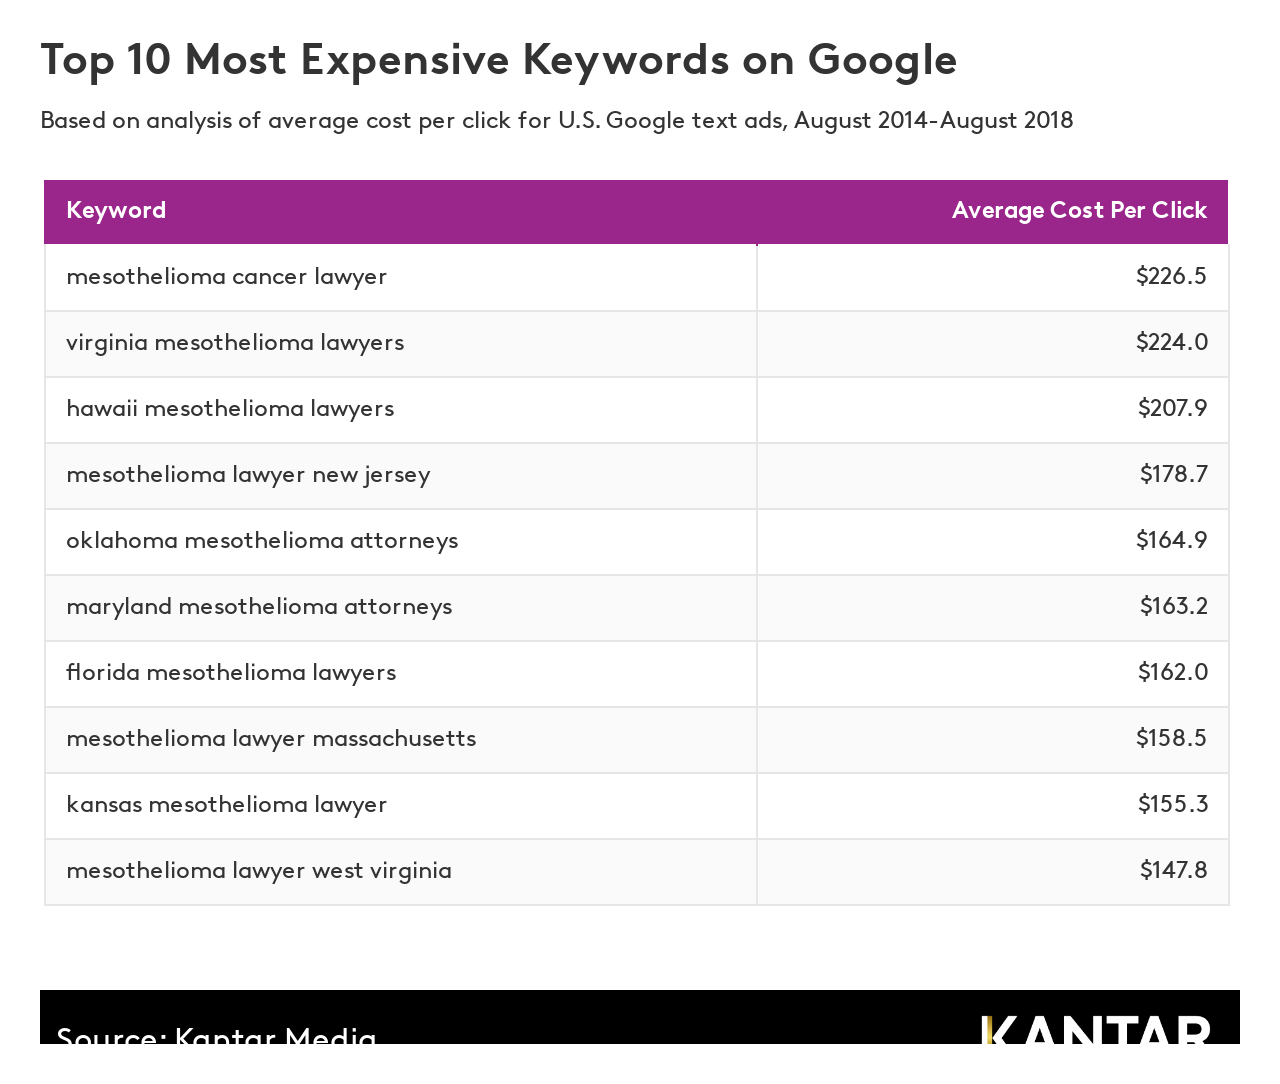 Top 10 most expensive keywords on Google